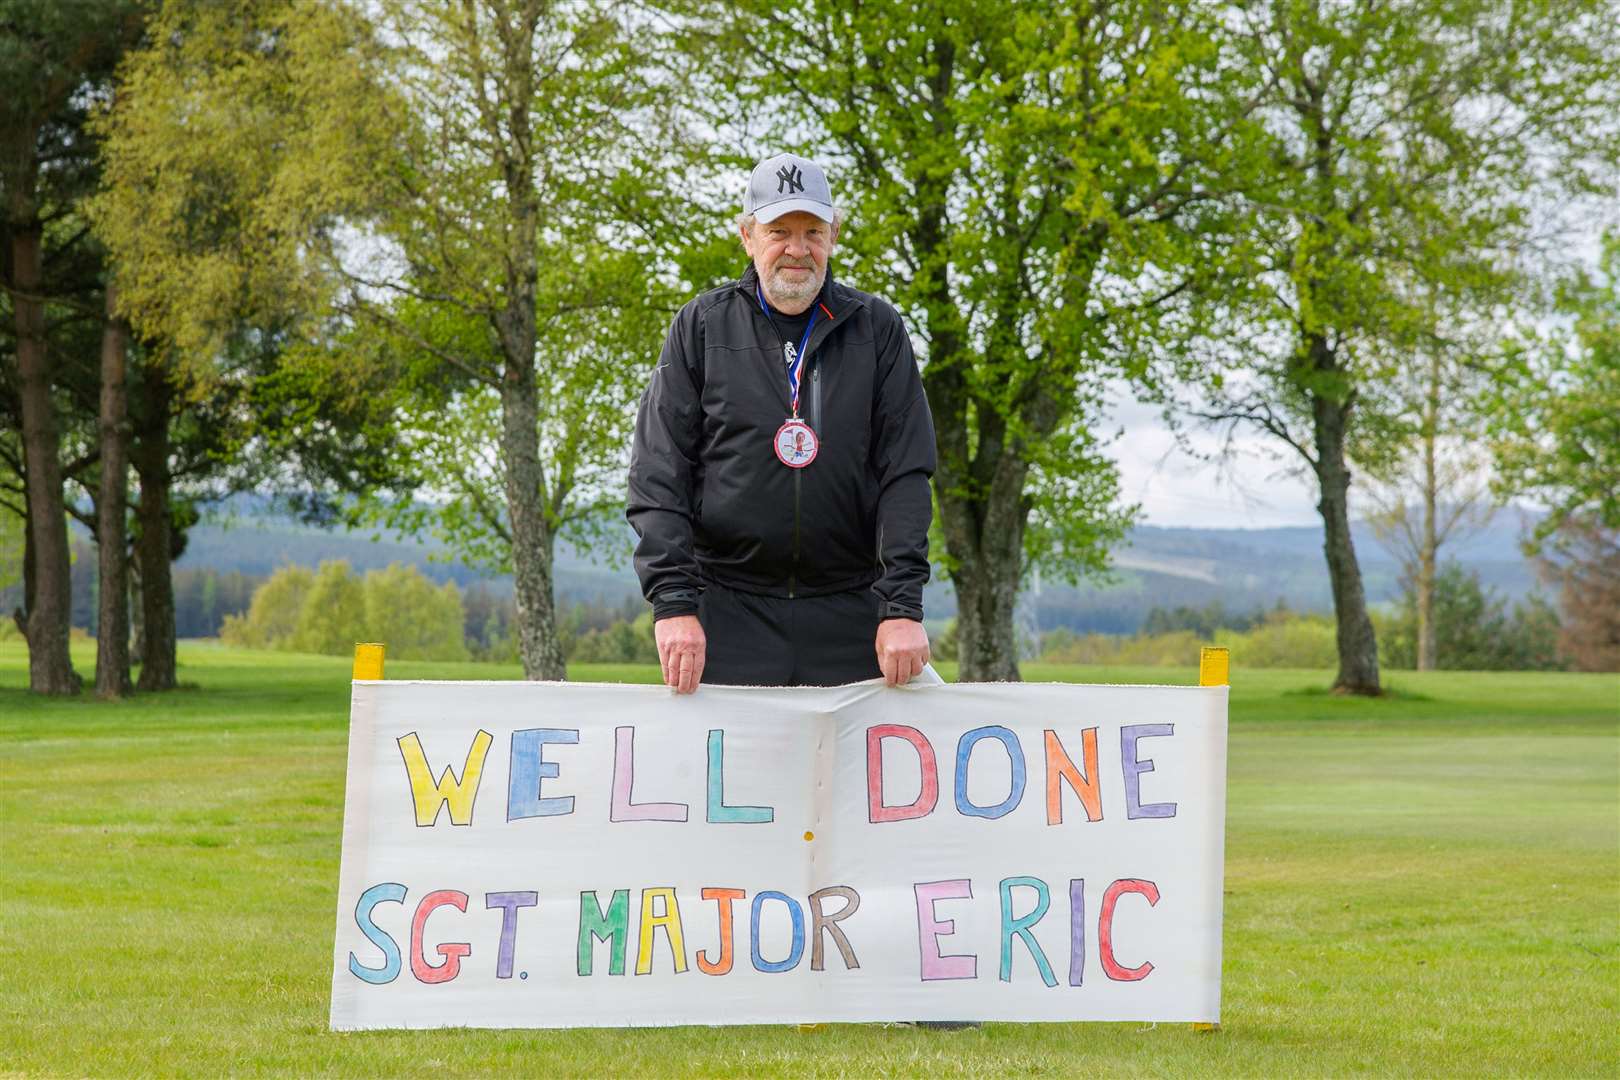 After around 300 laps around Keith Golf Club's 18th green, Eric Sharp completes his five-day fundraising marathon. Picture: Daniel Forsyth